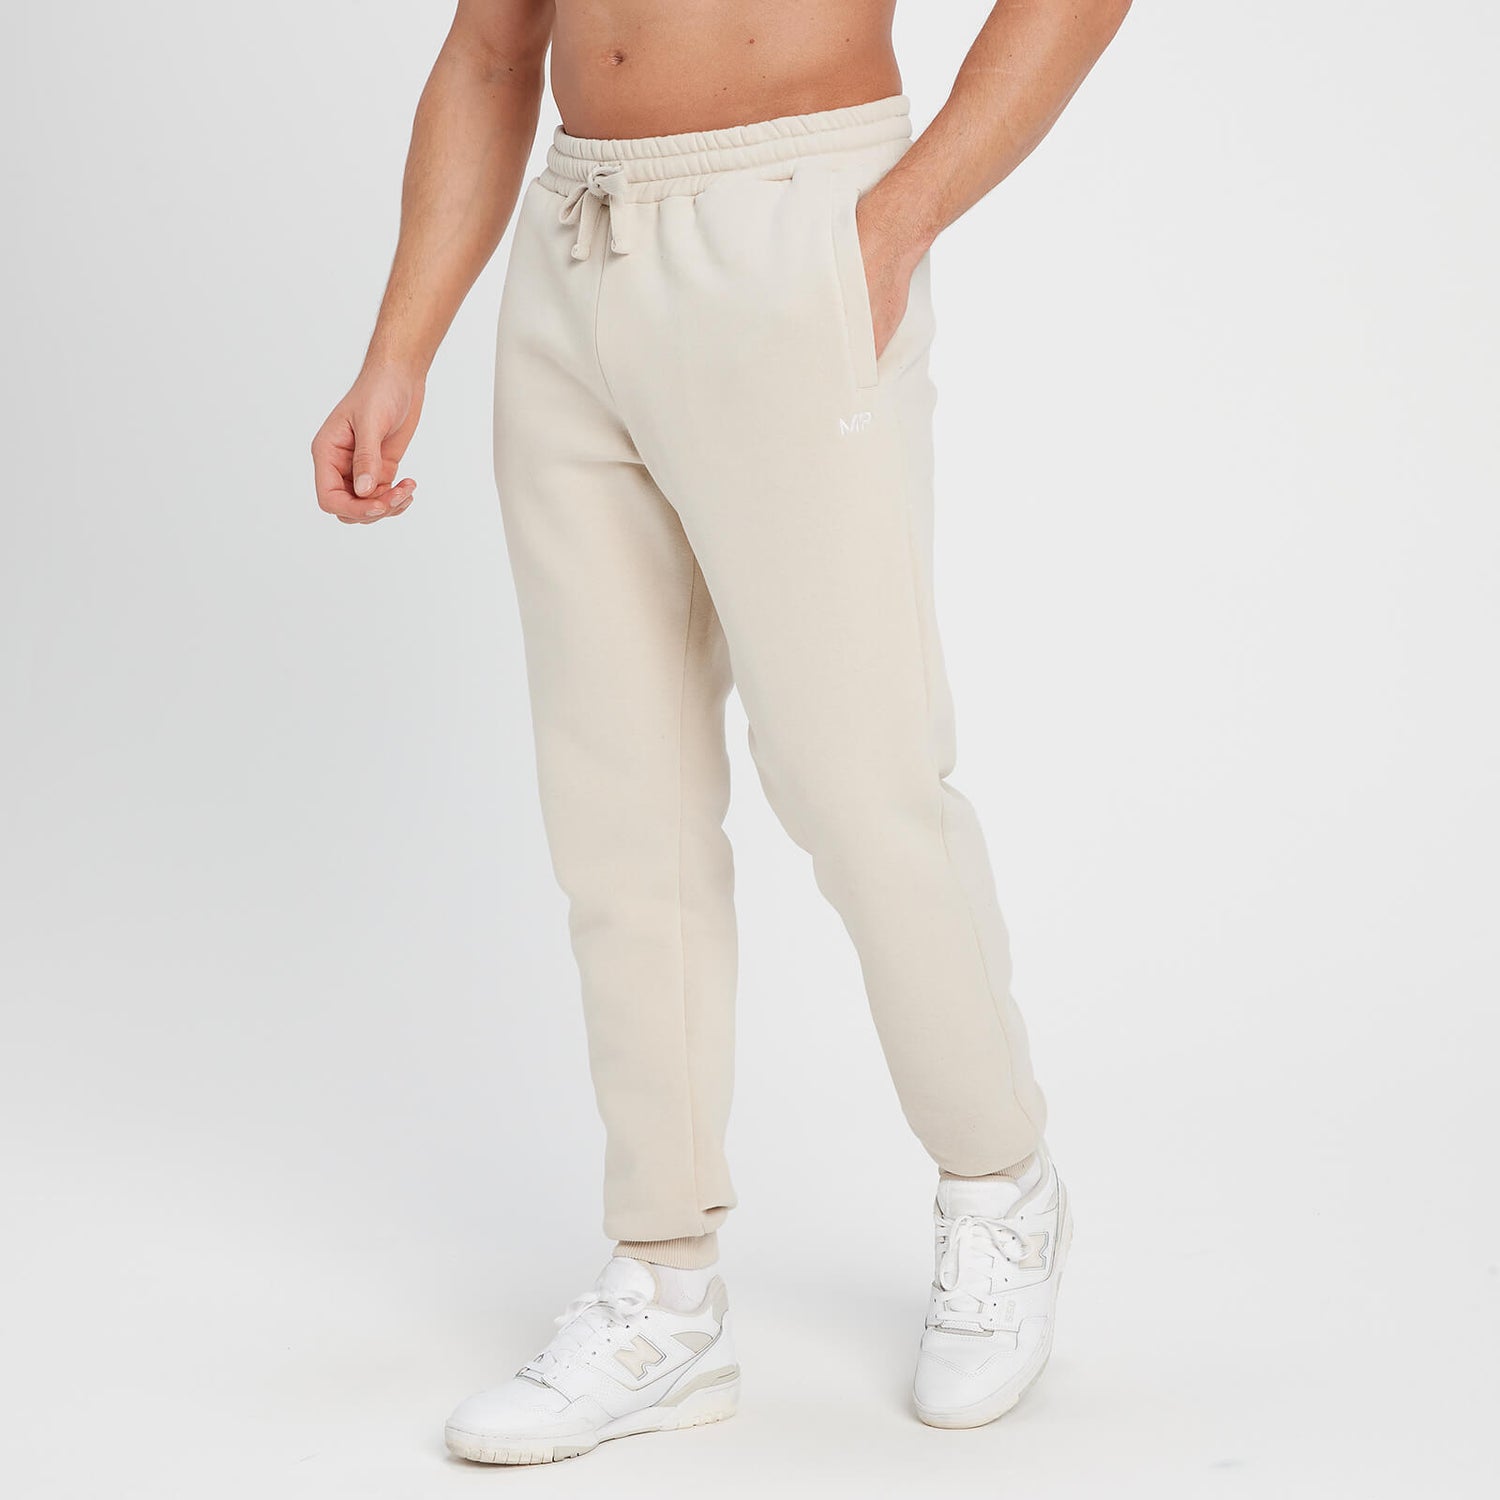 MP Men's Rest Day Joggers - Sand - S